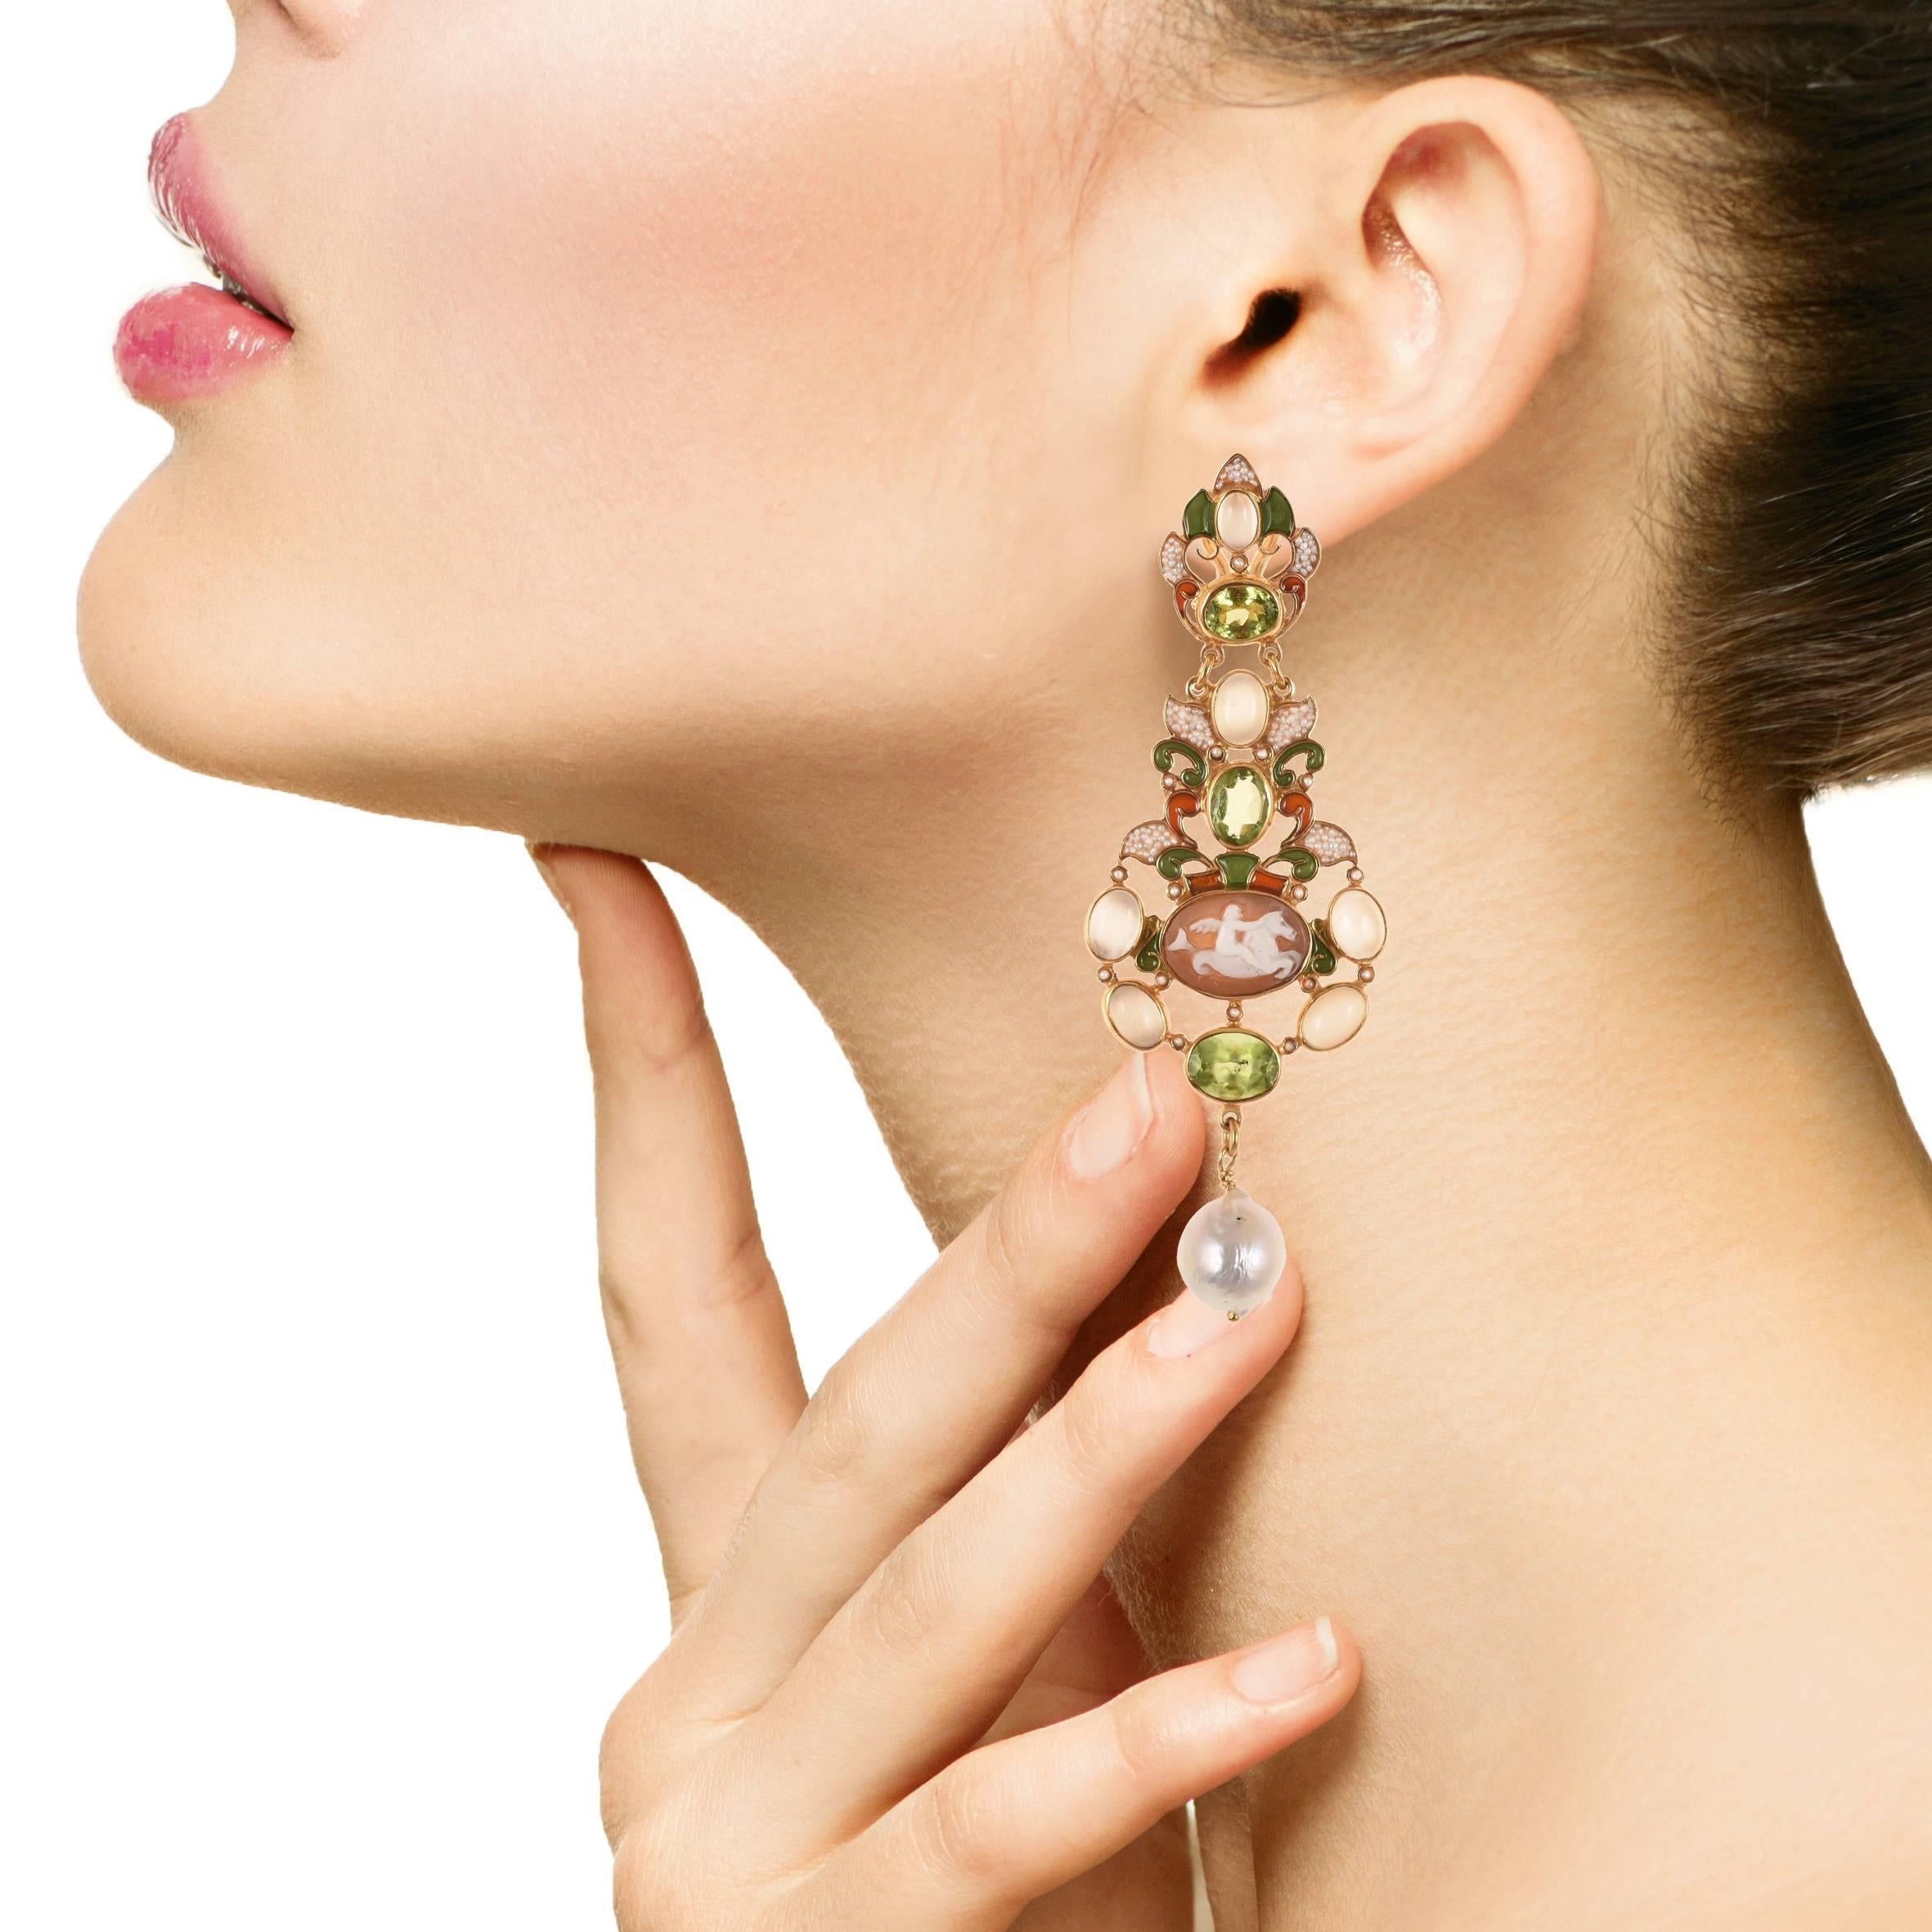 One of a kind earrings are handmade and gold-plated and have precious stones of moon stone, peridot and pearls with gorgeous central small cameo. 

They are designed by Diego Percossi Papi and manufactured in his laboratory in Rome. 

They are